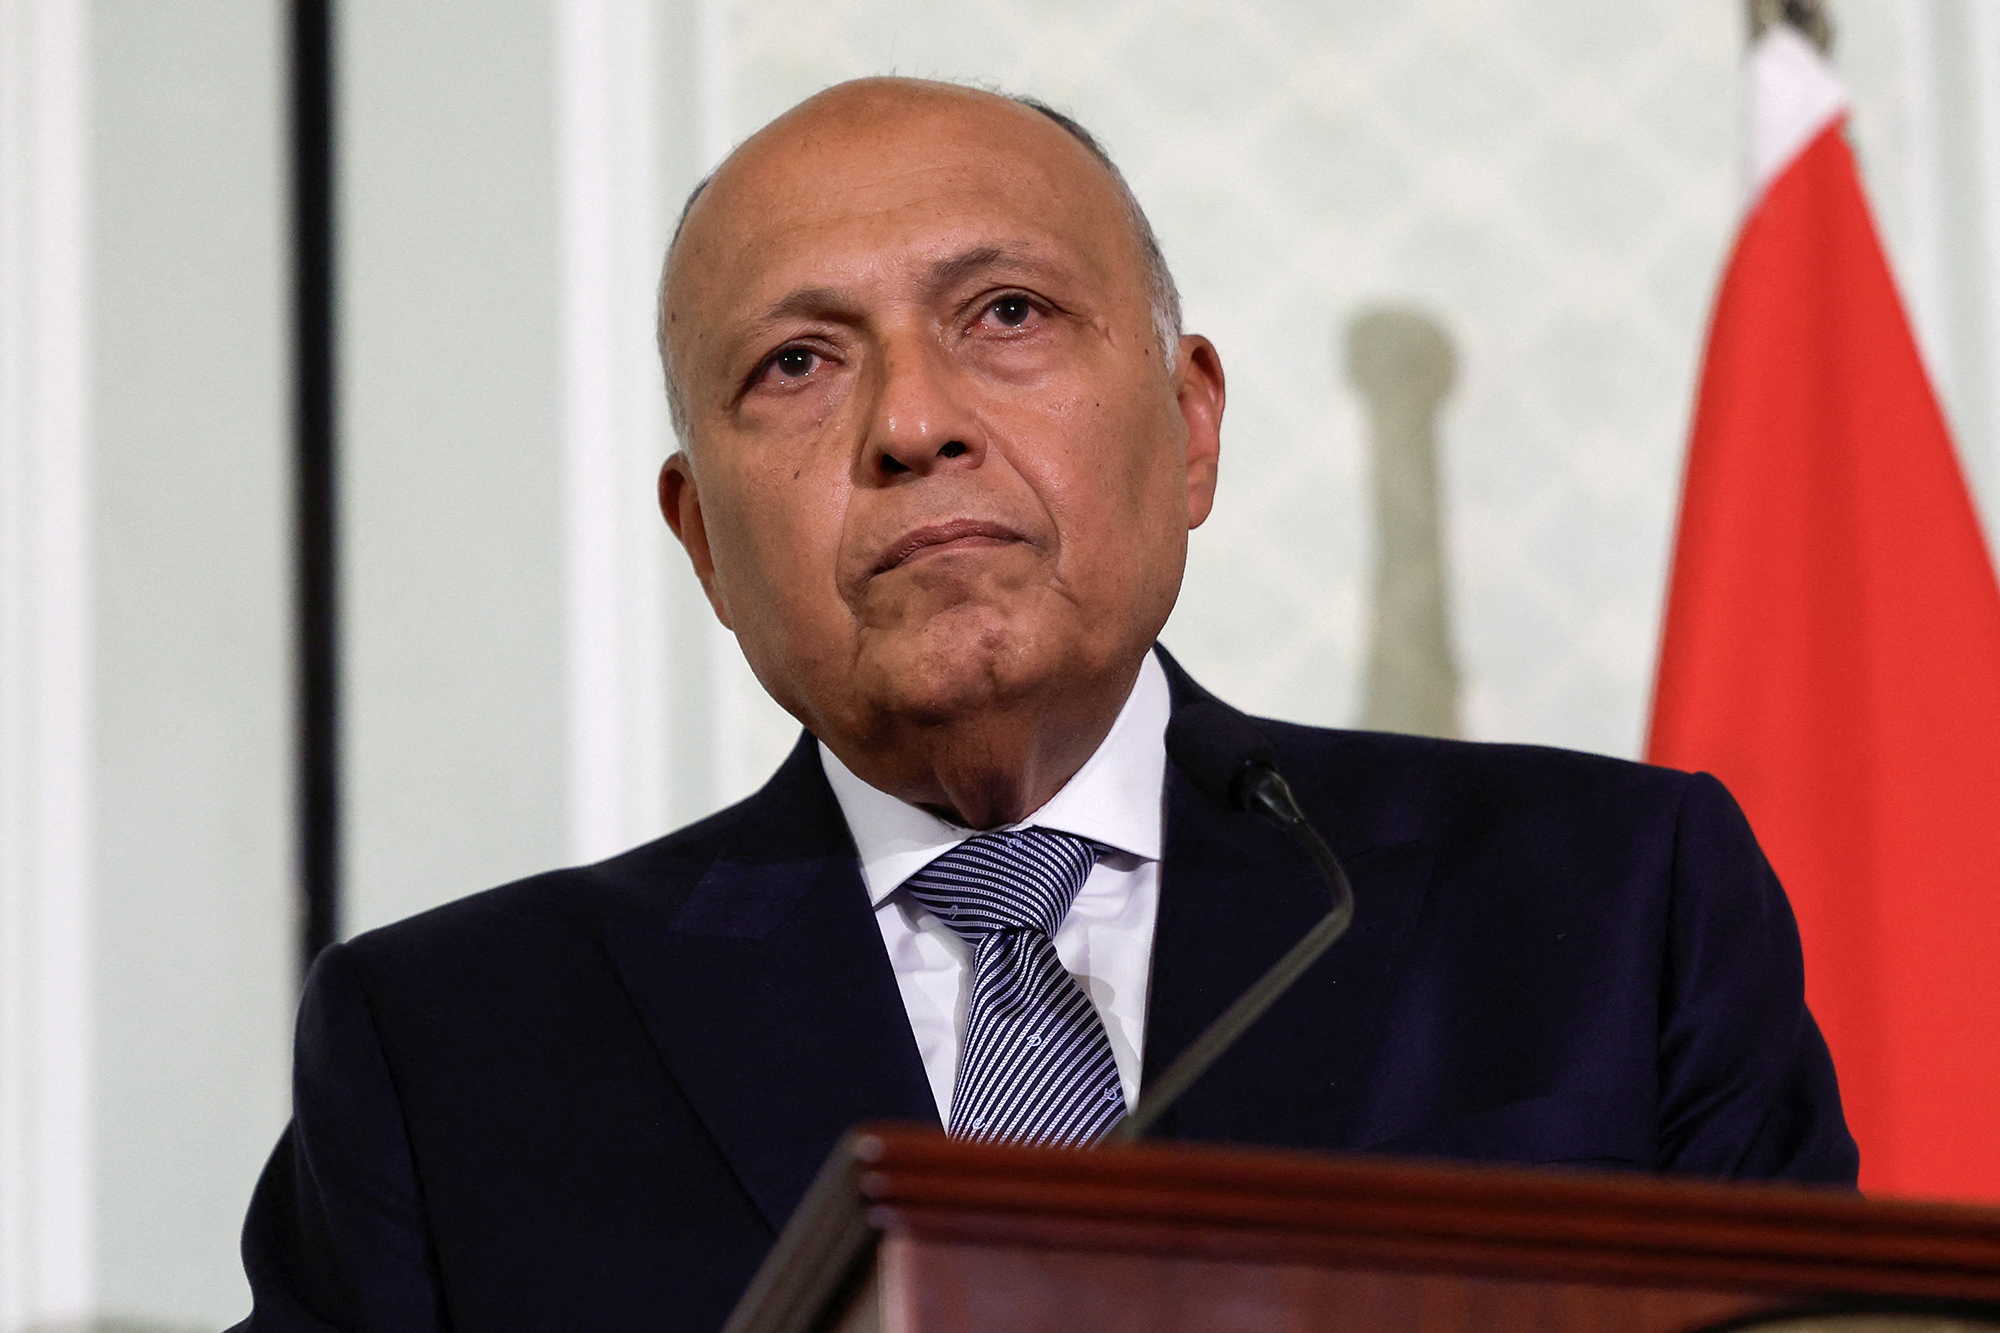 Egyptian Foreign Minister Sameh Shoukry attends a press conference in Cairo, Egypt, on March 21.